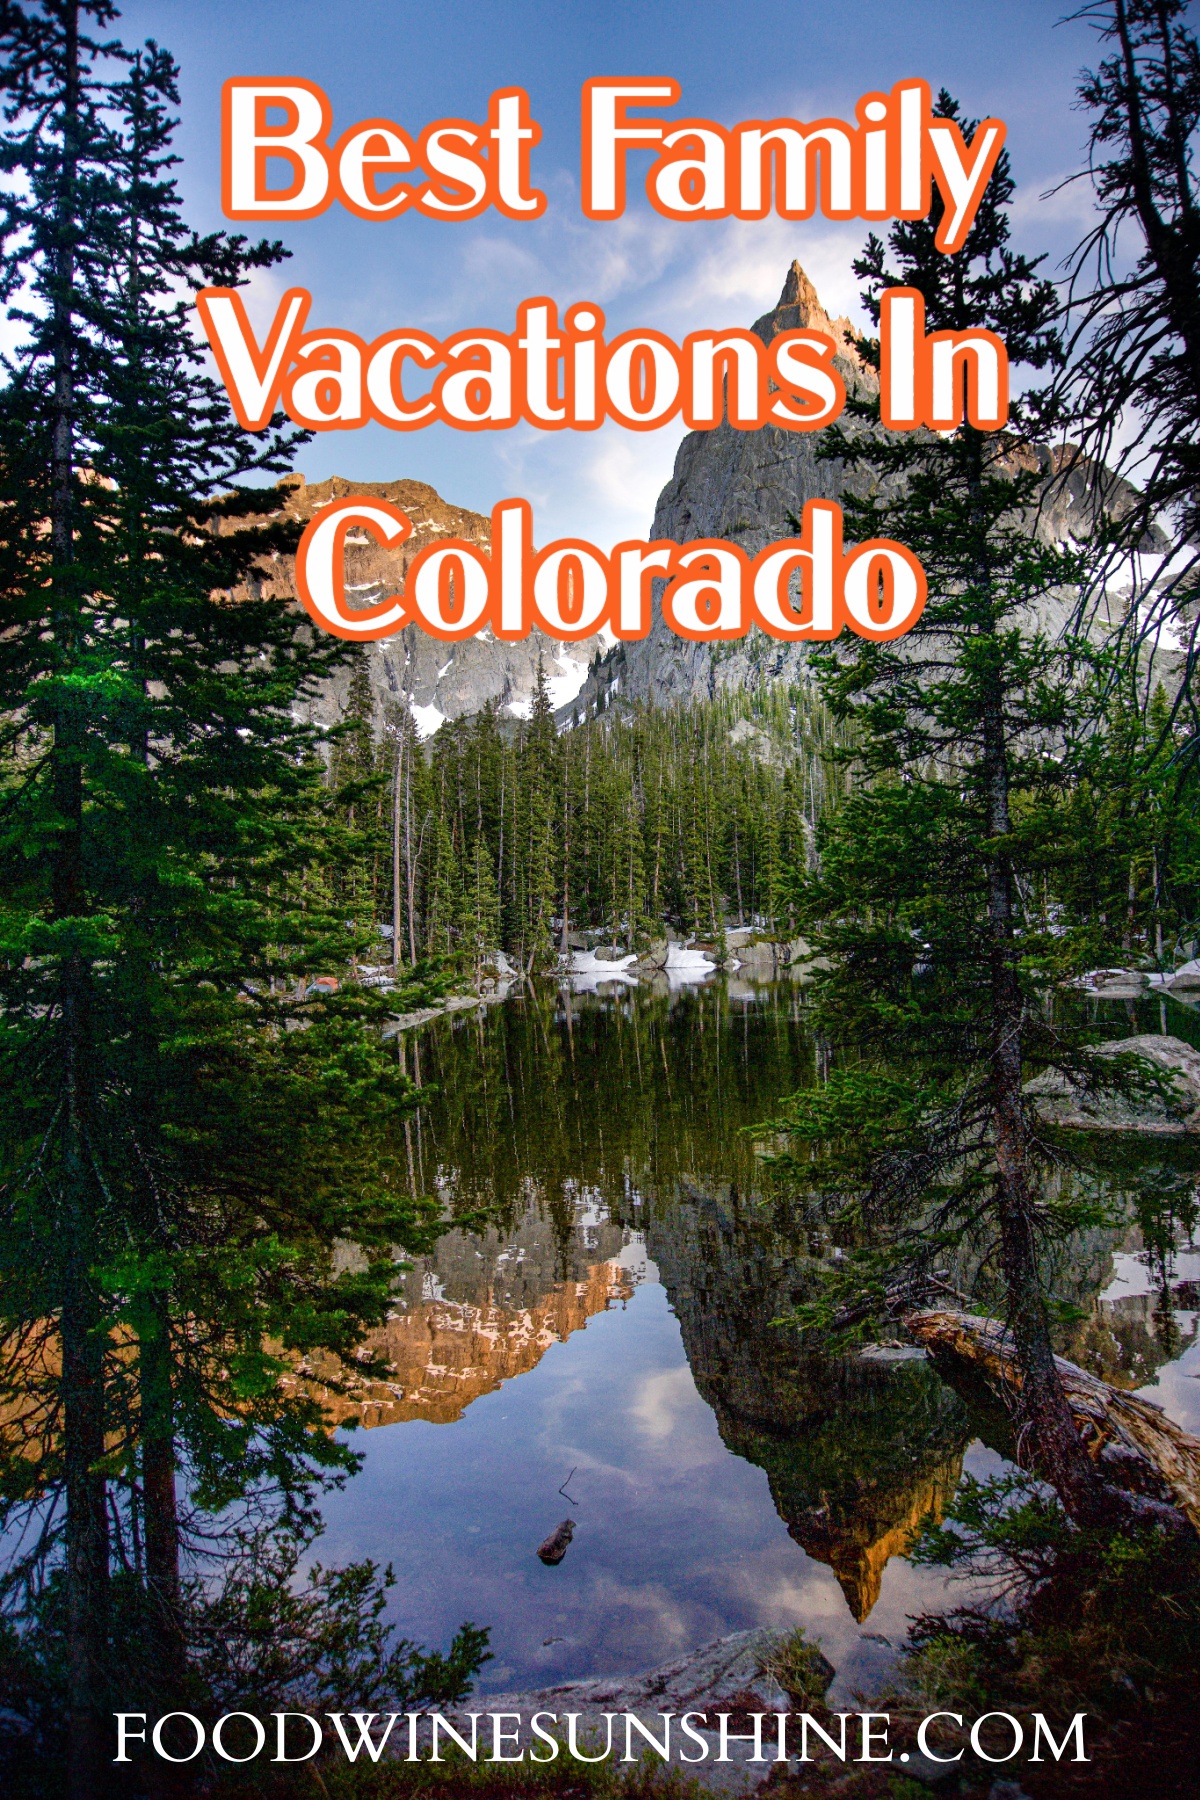 Best Family Vacations In Colorado